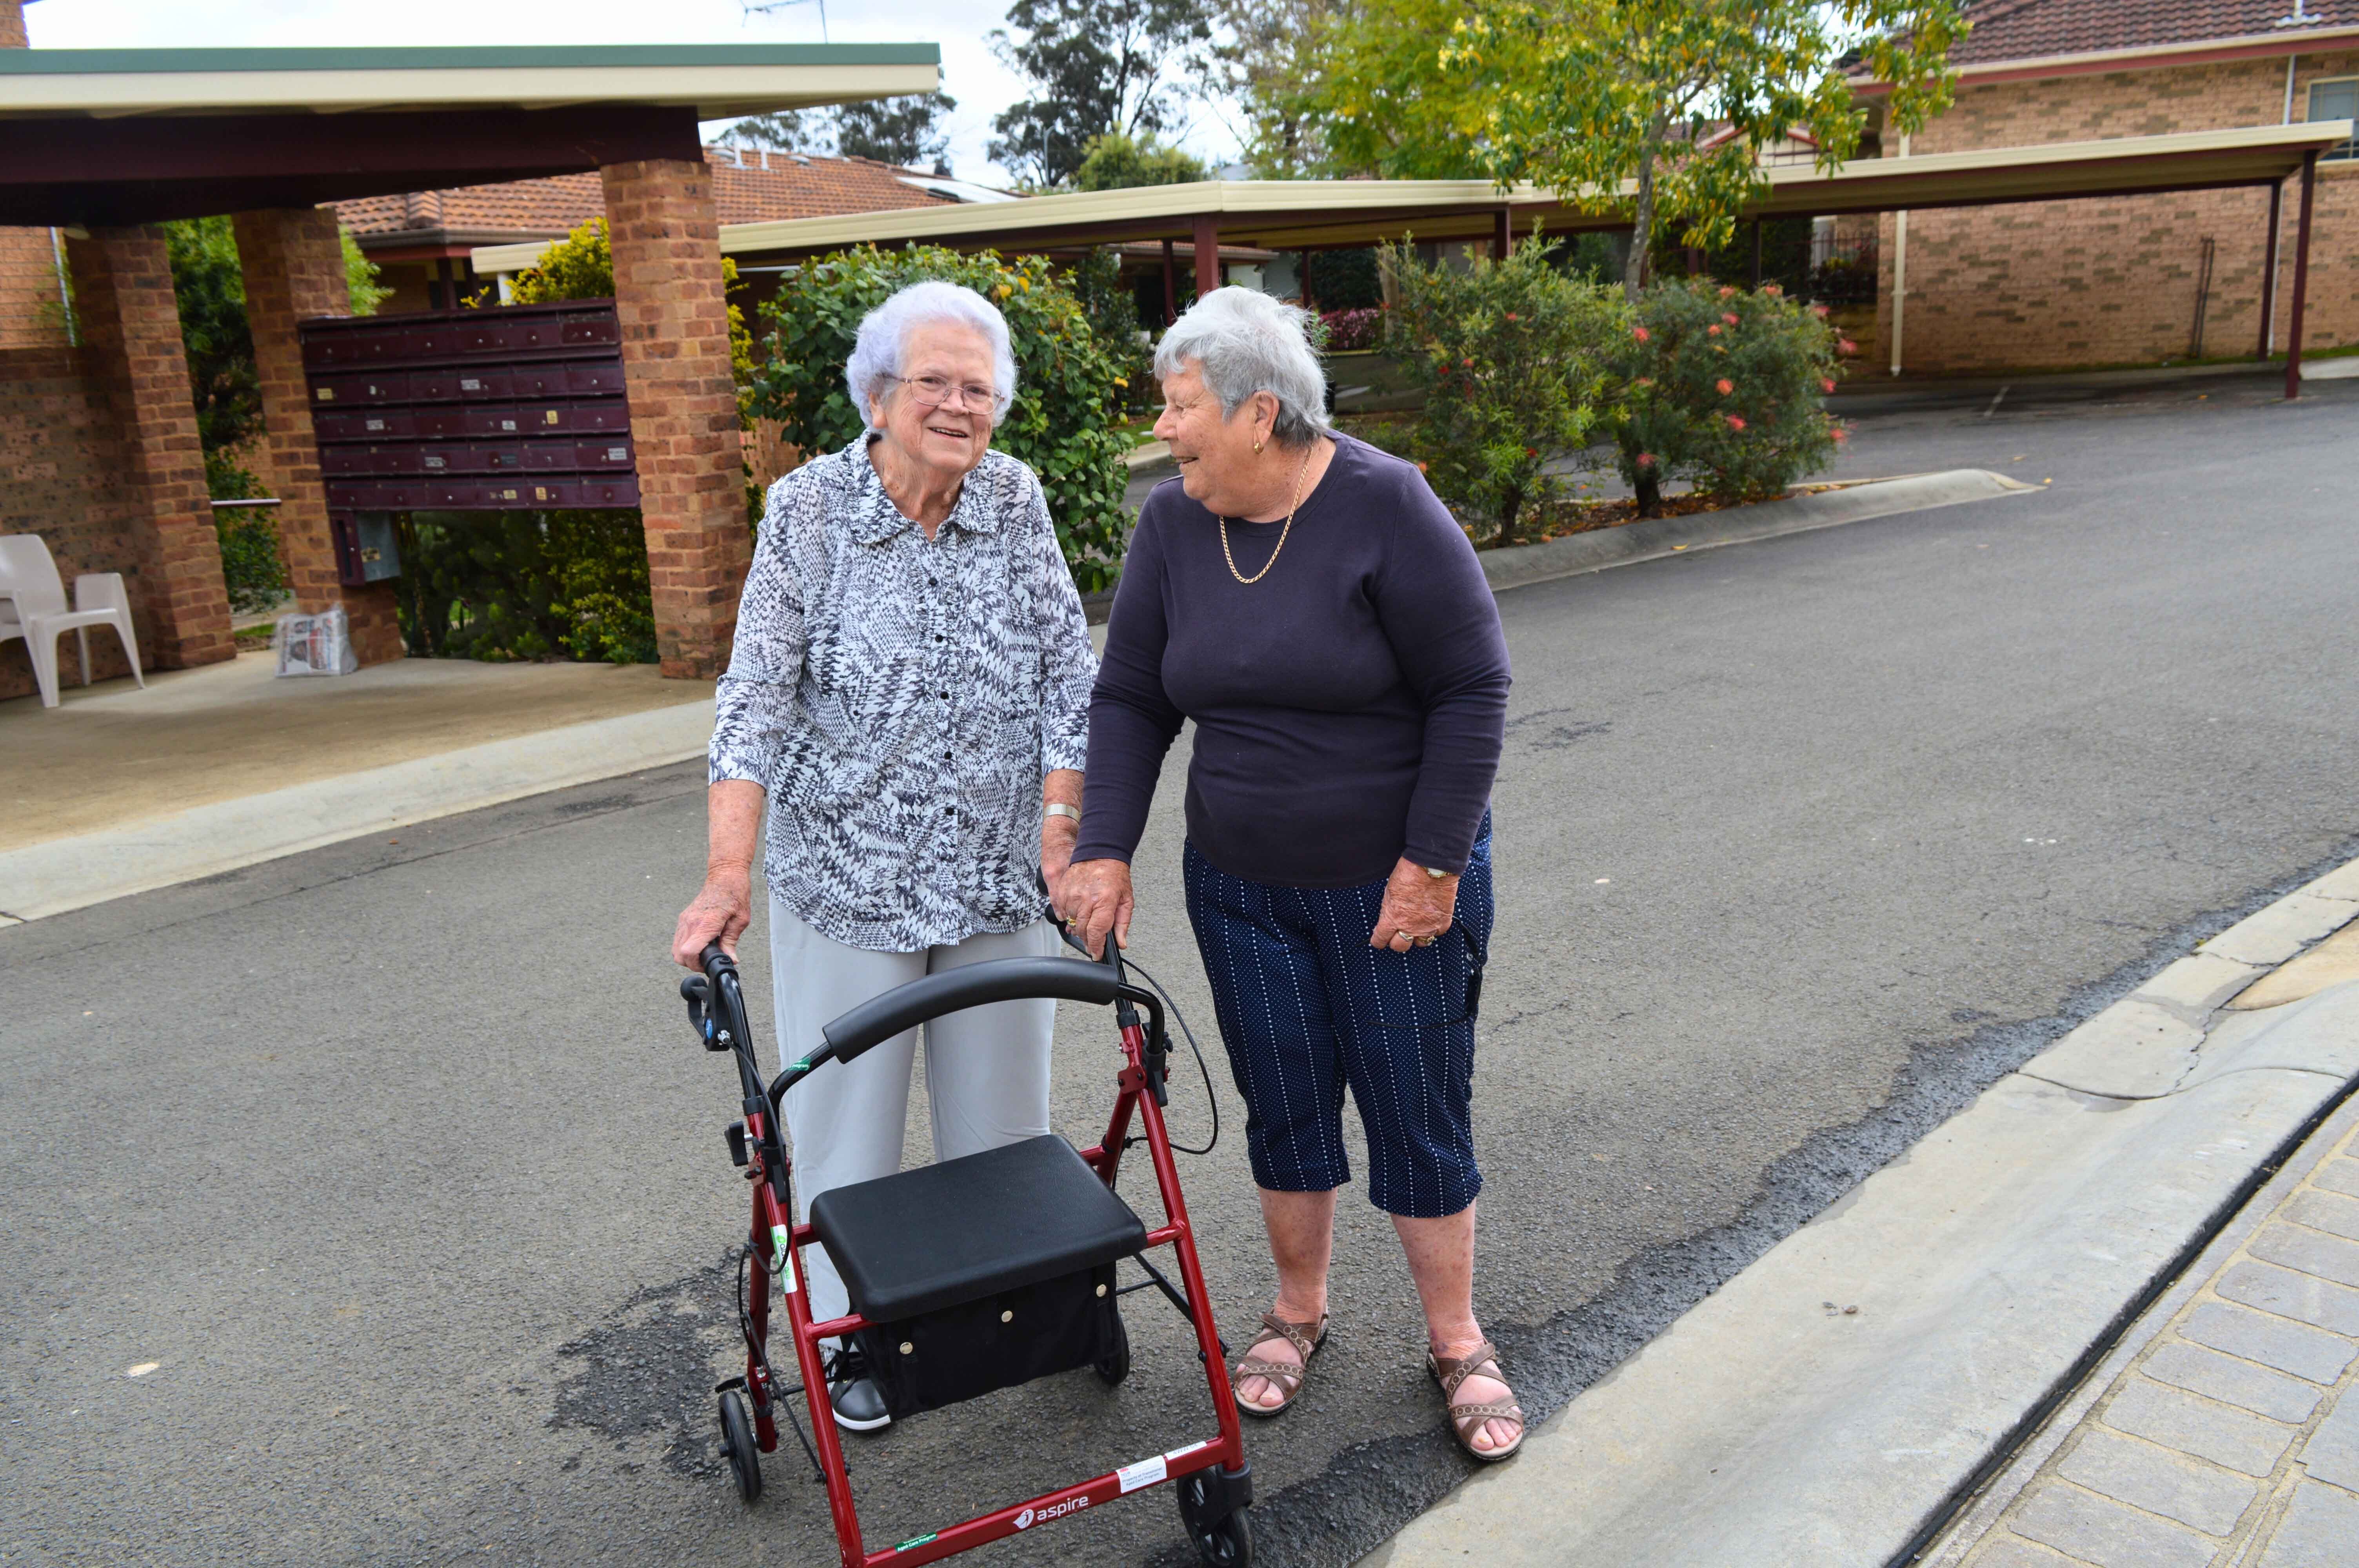 Patricia enjoys chatting with other Angus Bristow retirement village residents during her morning walk.